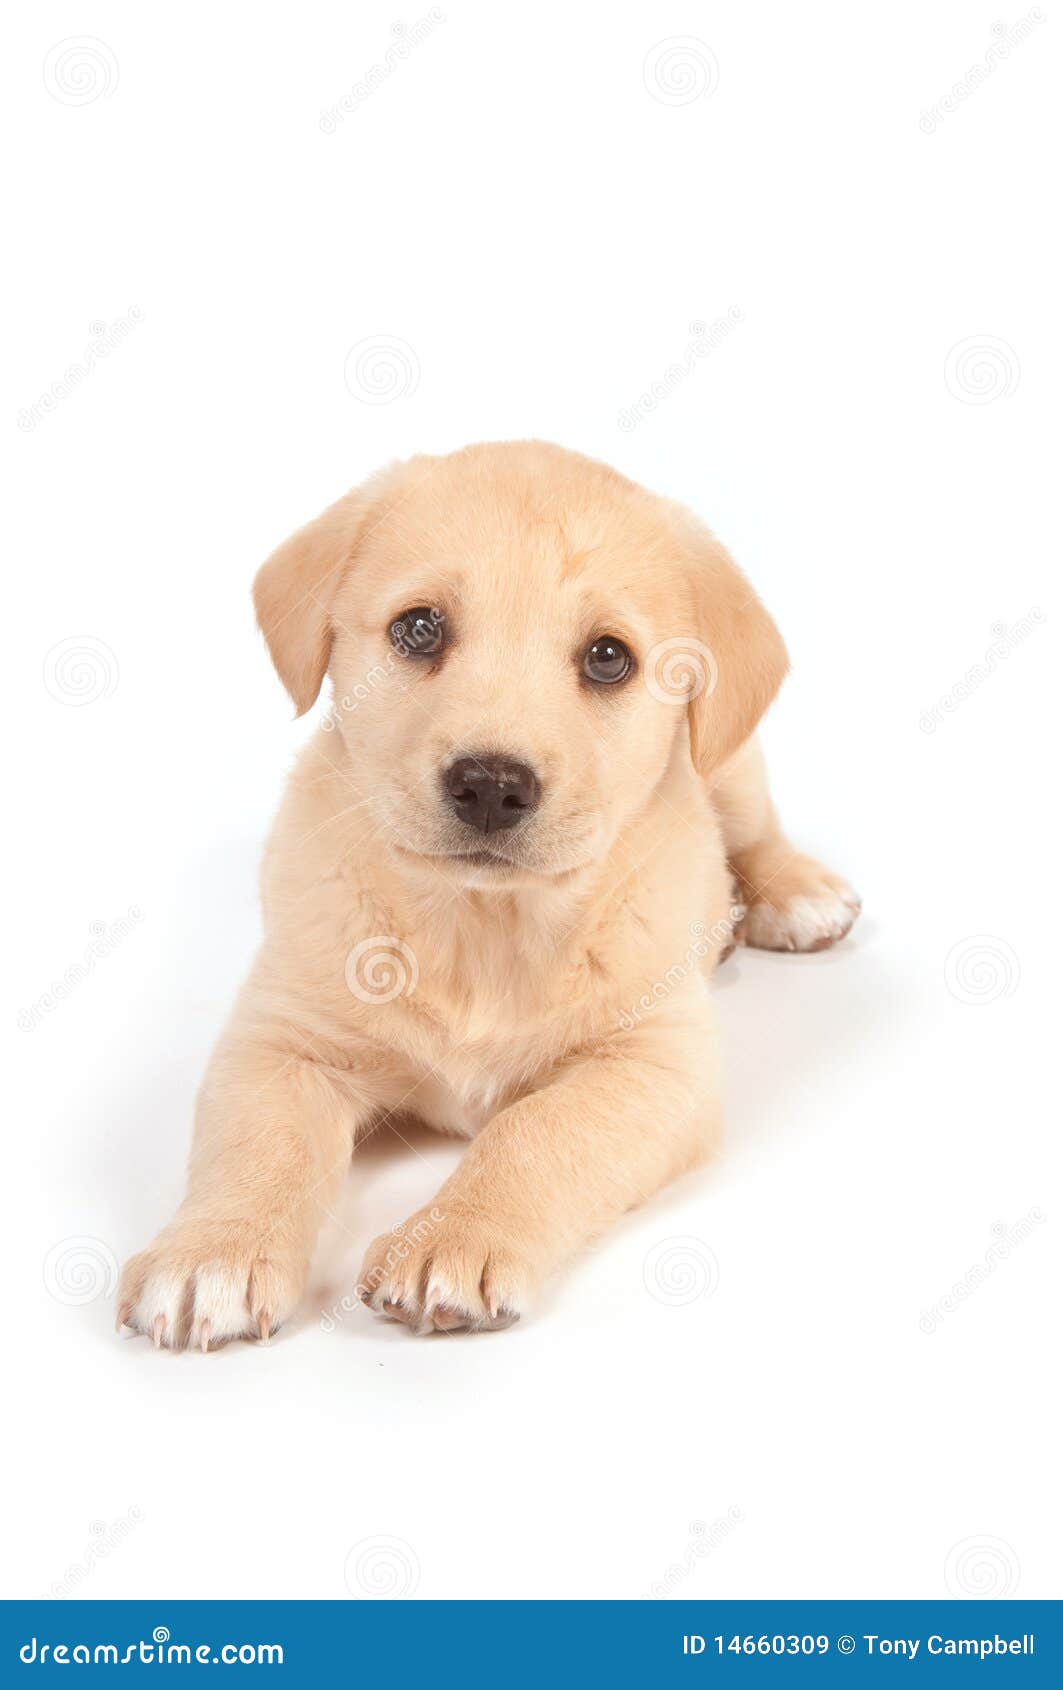 Cute Puppy On White Background Royalty Free Stock Images - Image: 14660309